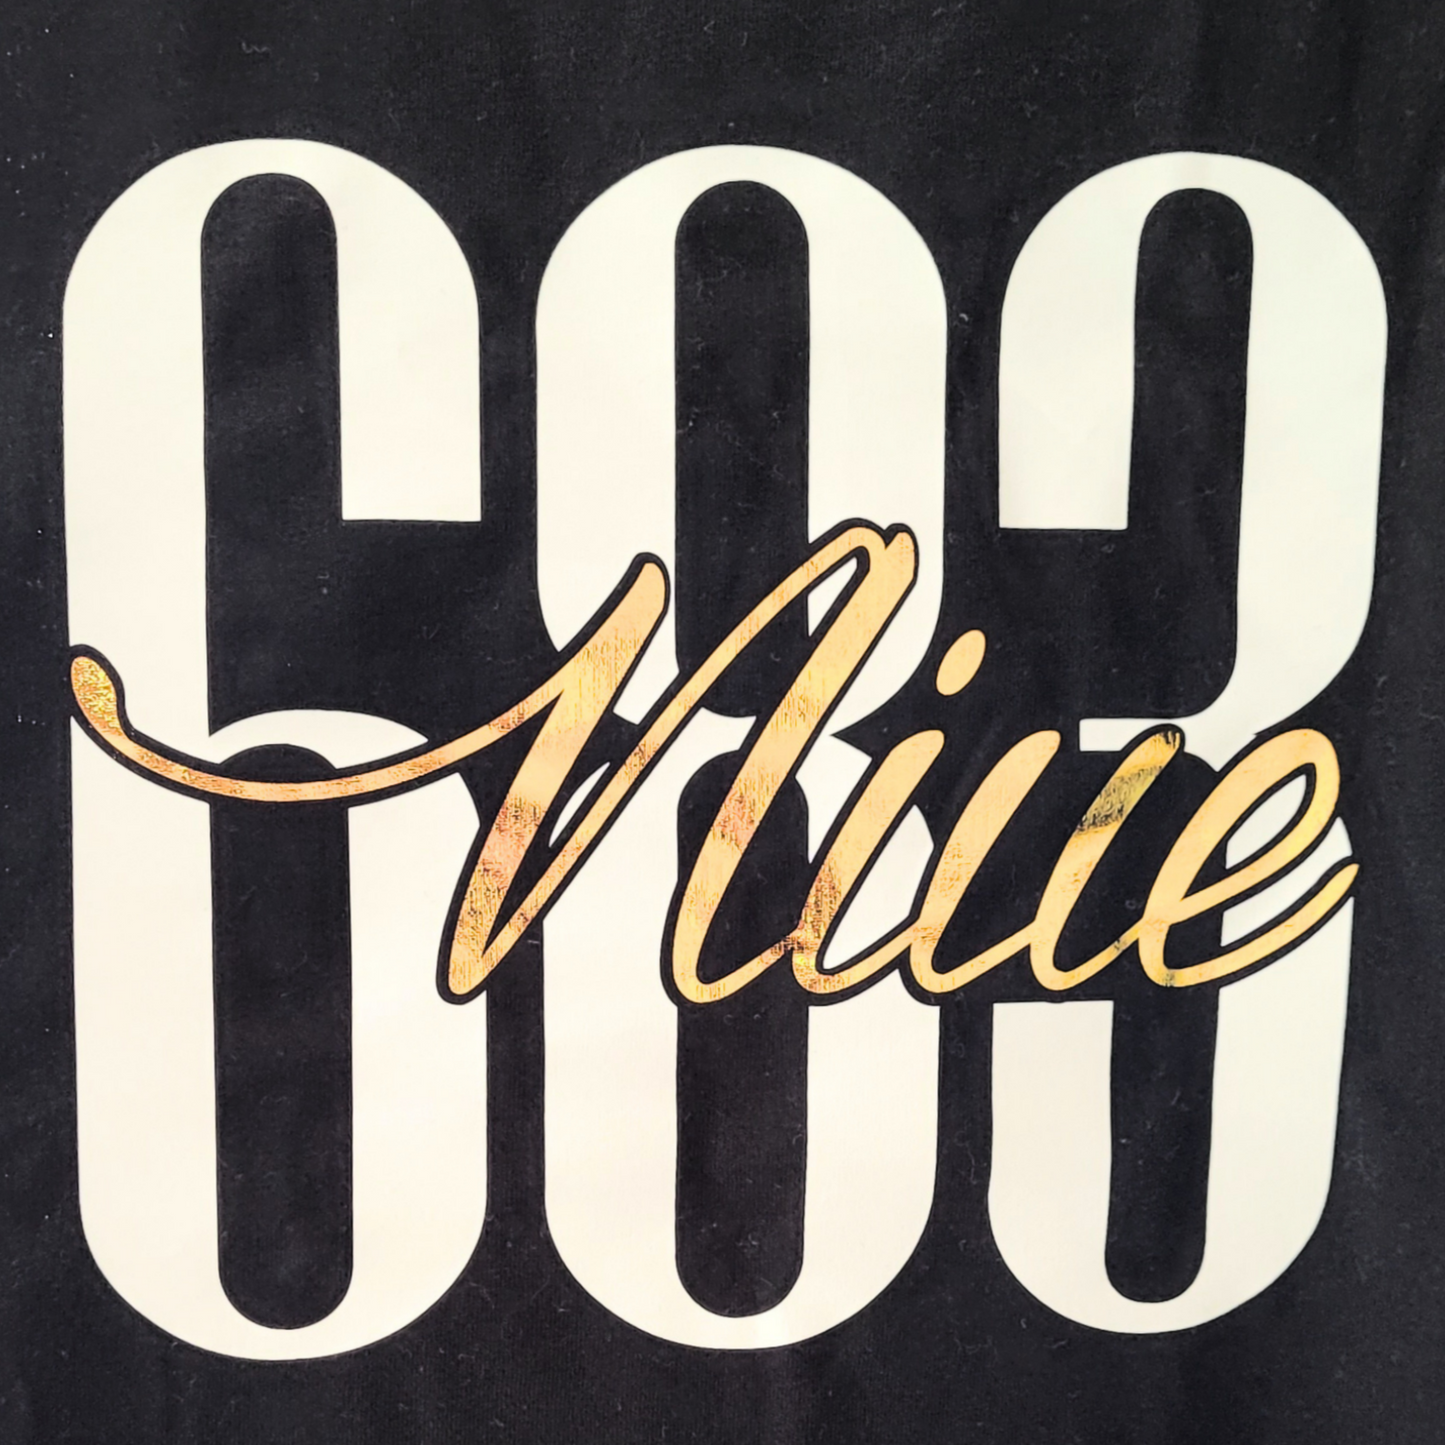 Niue 683 t-shirt. Style Black - with white vinyl numbers 683. with holographic word Niue striking through it. perfect for everyday wear.